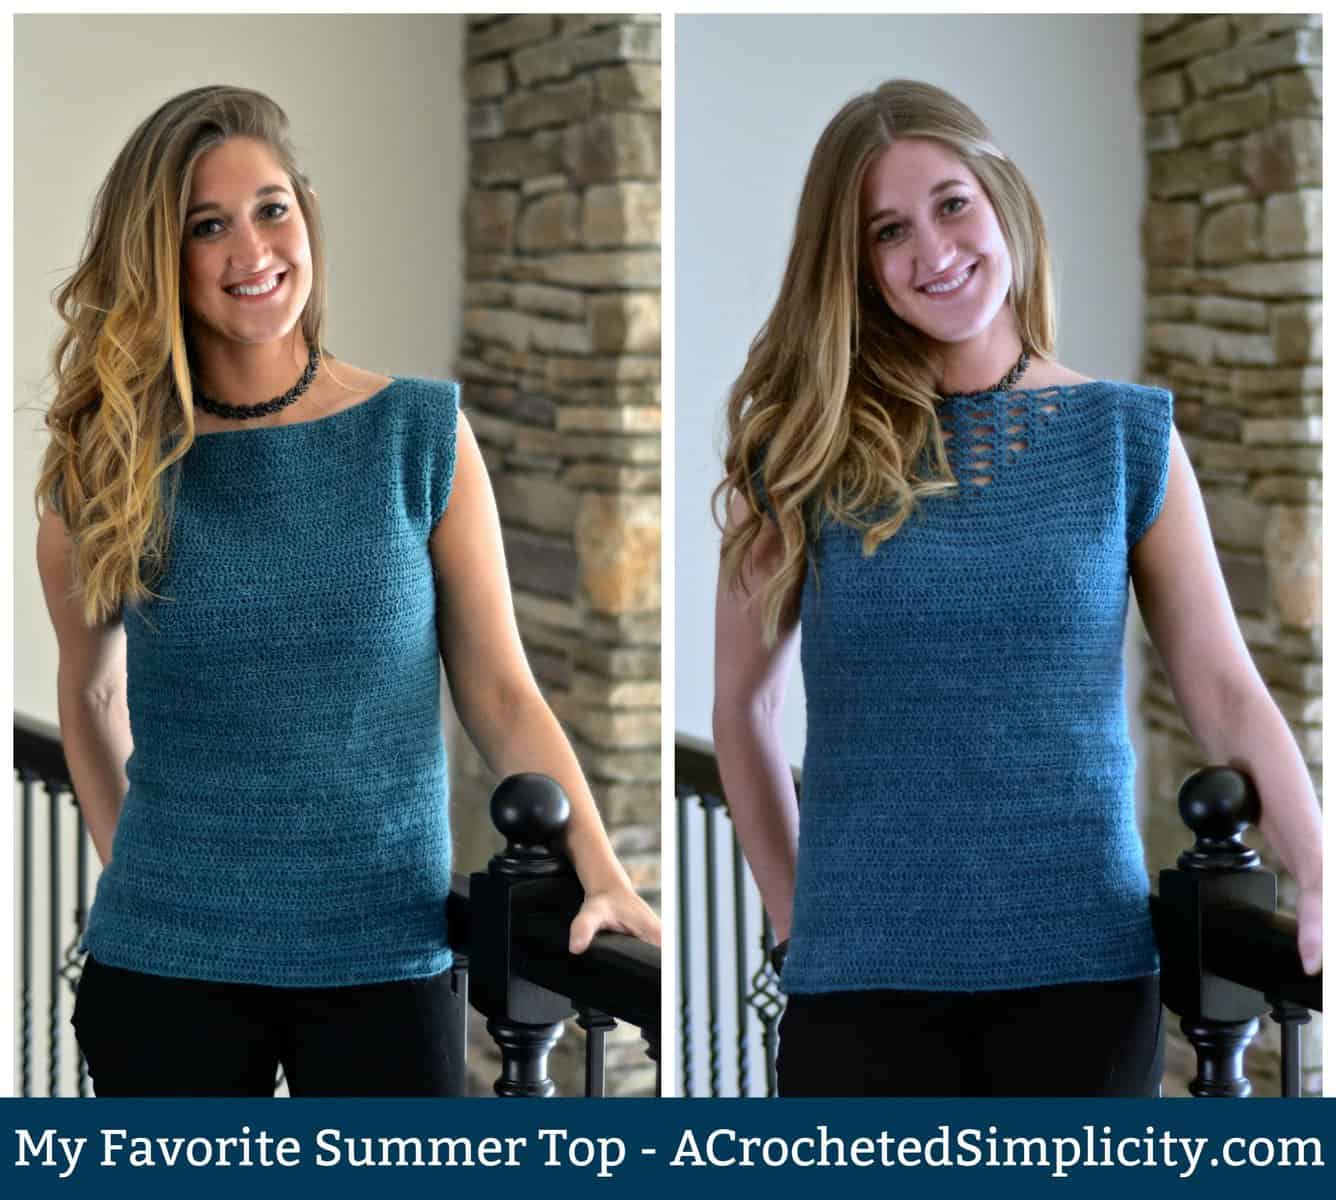 Young woman modeling the front and back of a lightweight summer crochet top.